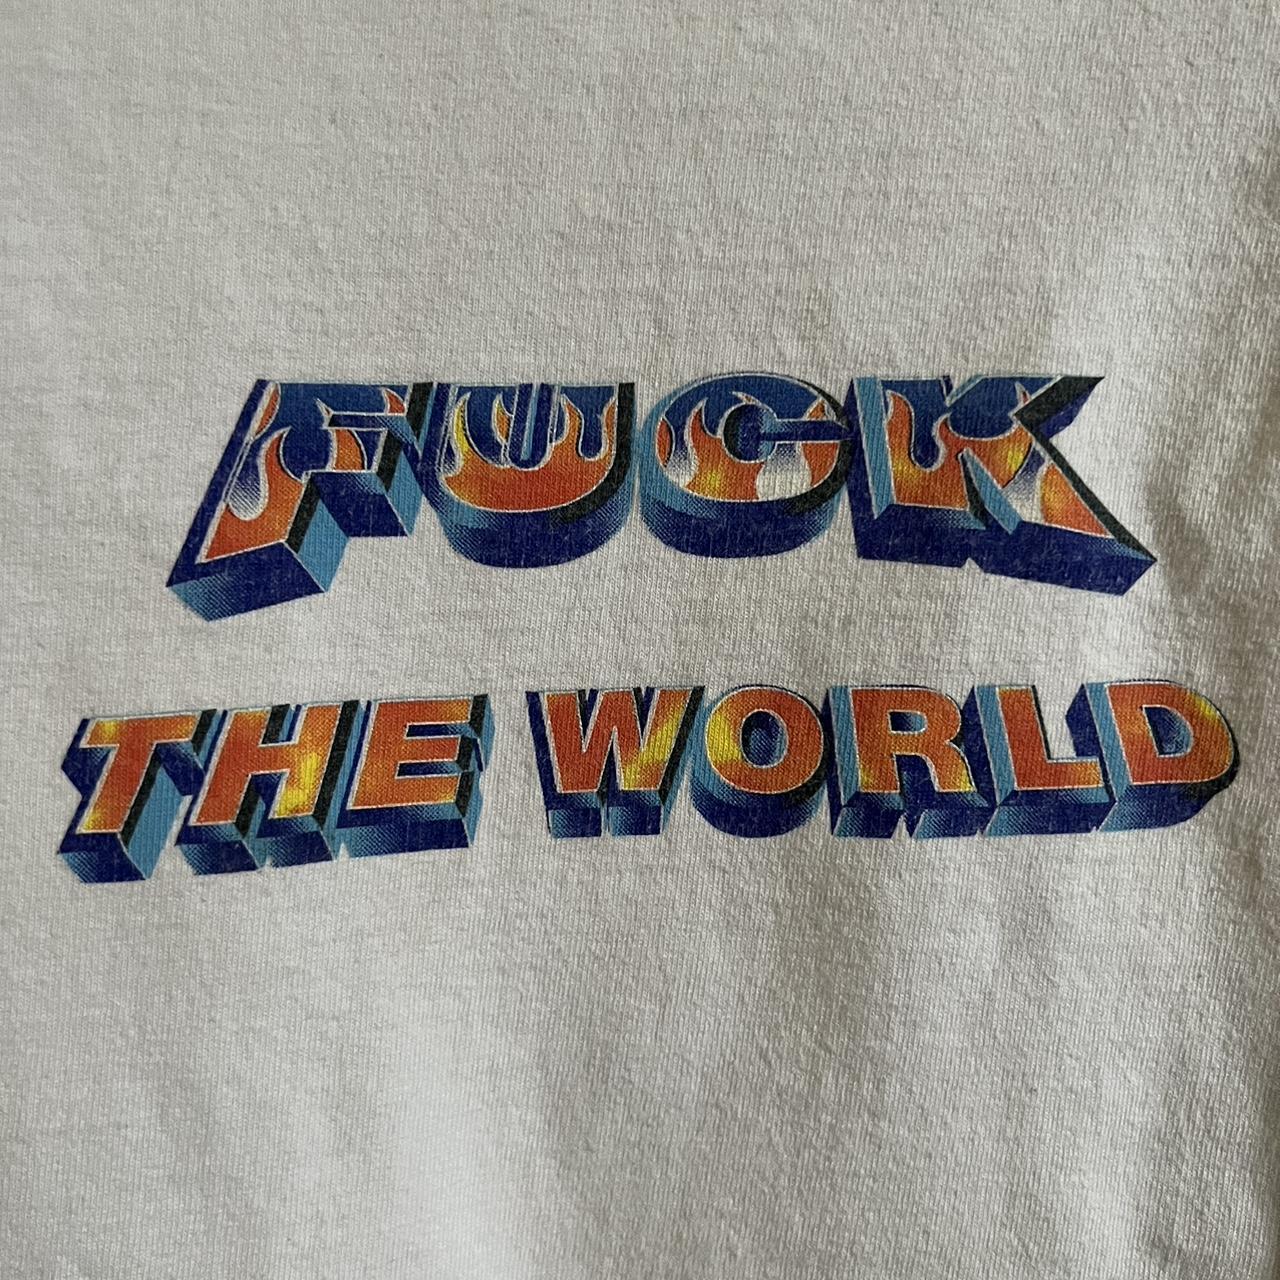 SUPREME FUCK THE WORLD TEE- RED MINT 10/10 - Depop